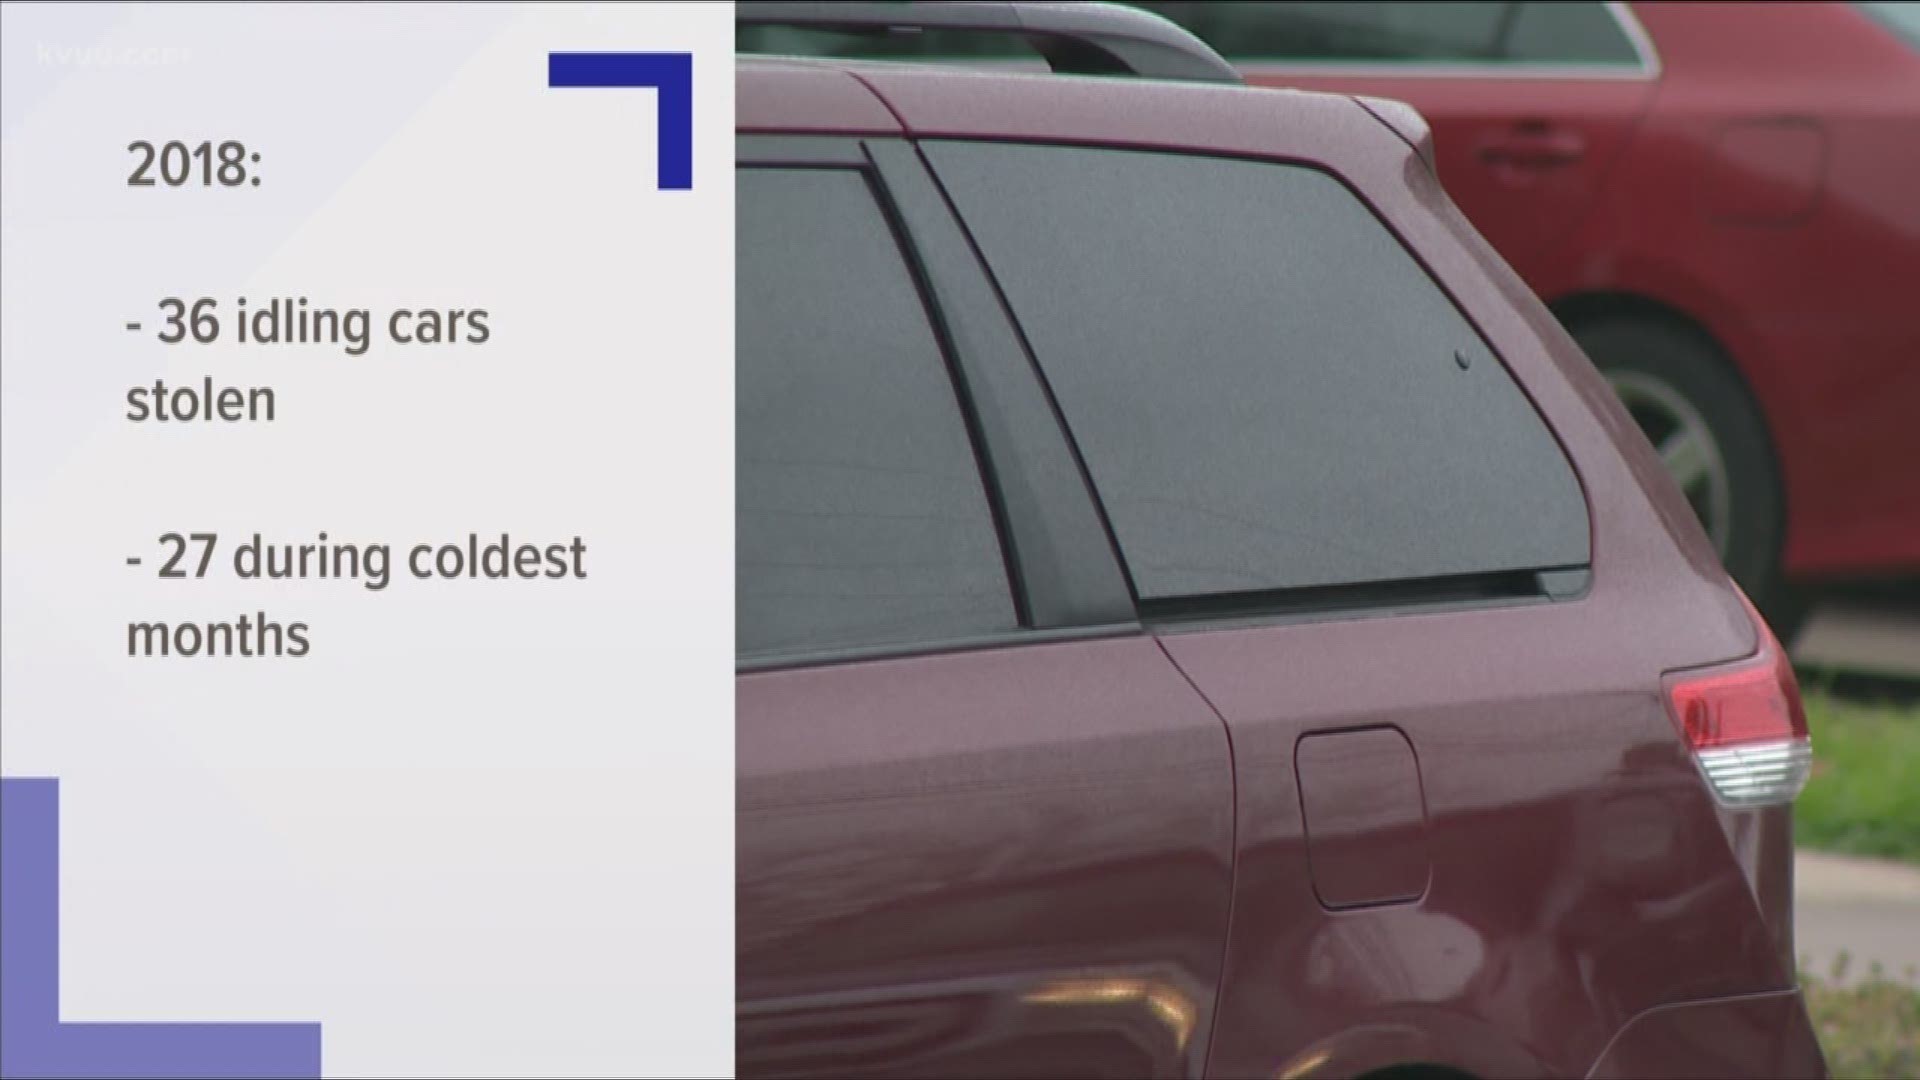 Last year alone, thieves drove off with 36 cars that people left running on driveways or apartment parking lots.